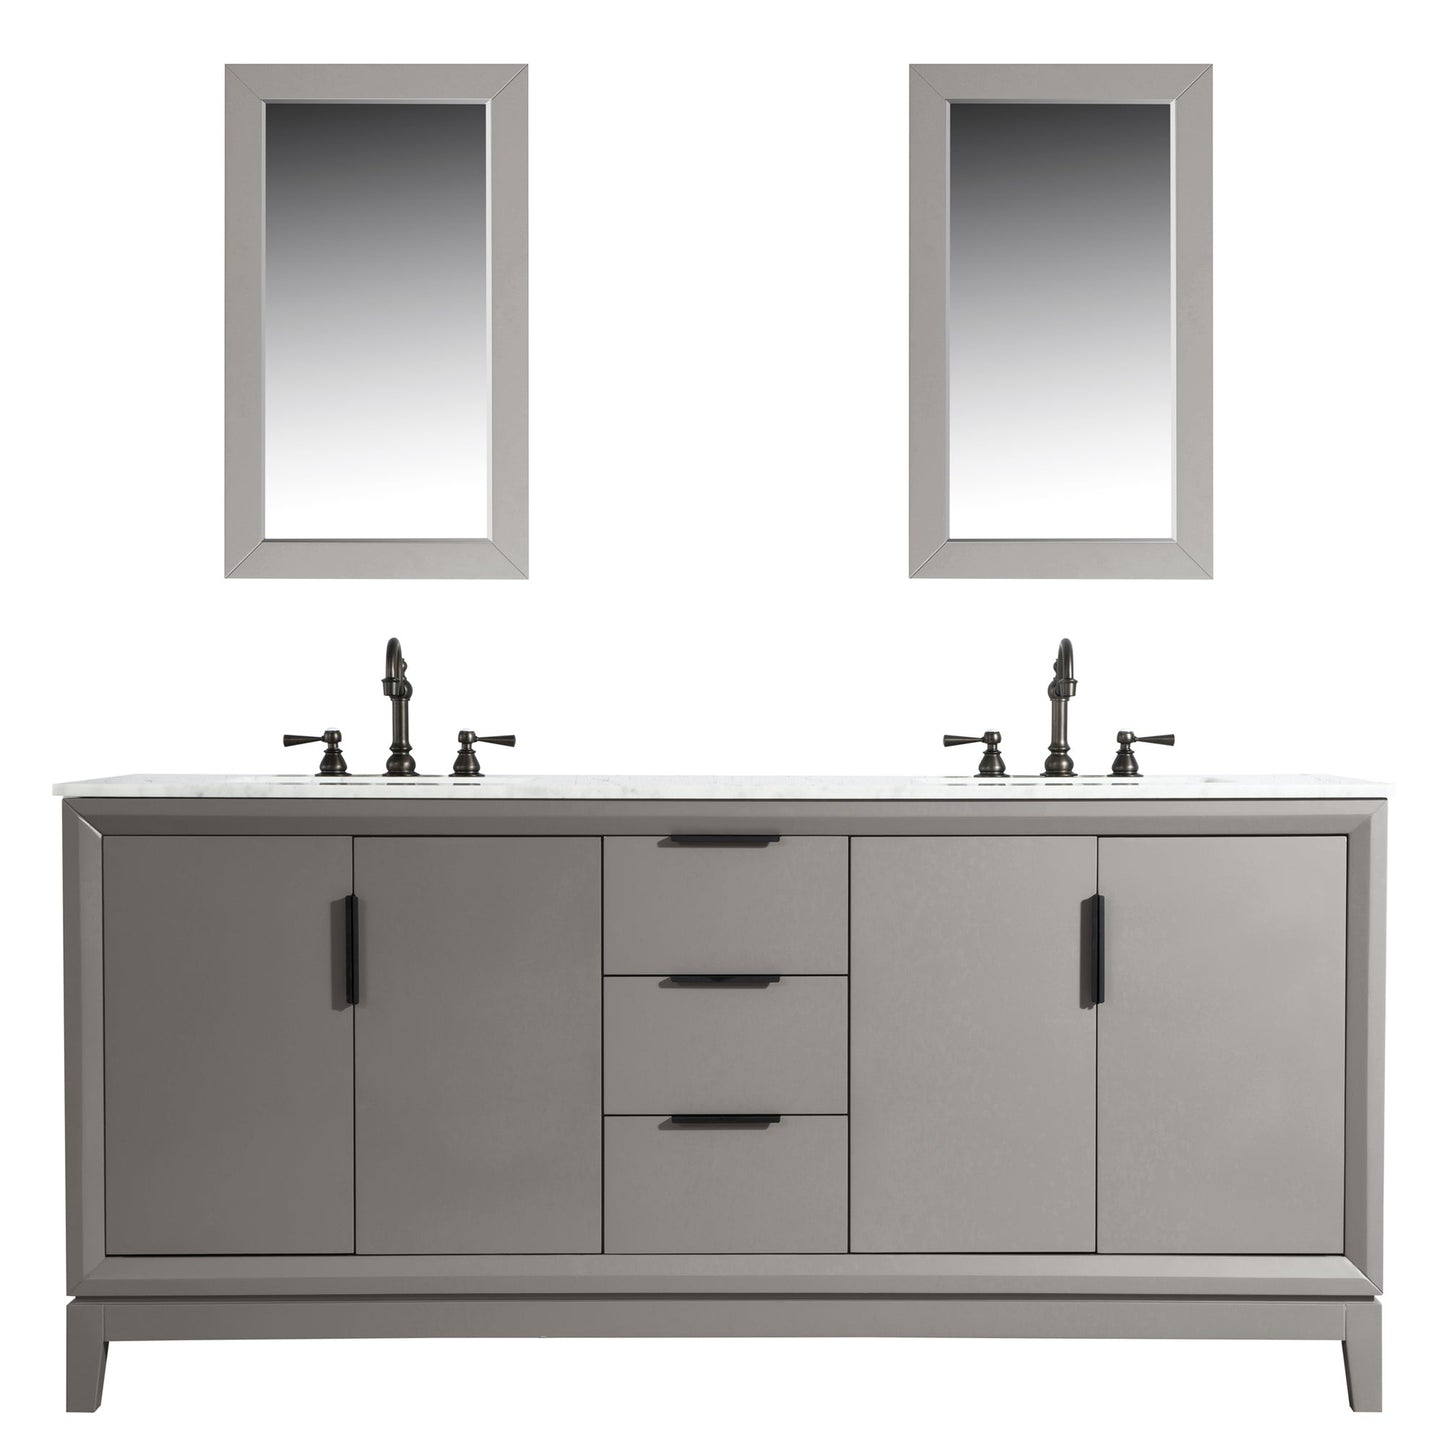 Water Creation Elizabeth 72" Double Sink Carrara White Marble Vanity In Cashmere Grey With Matching Mirror and F2-0012-03-TL Lavatory Faucet